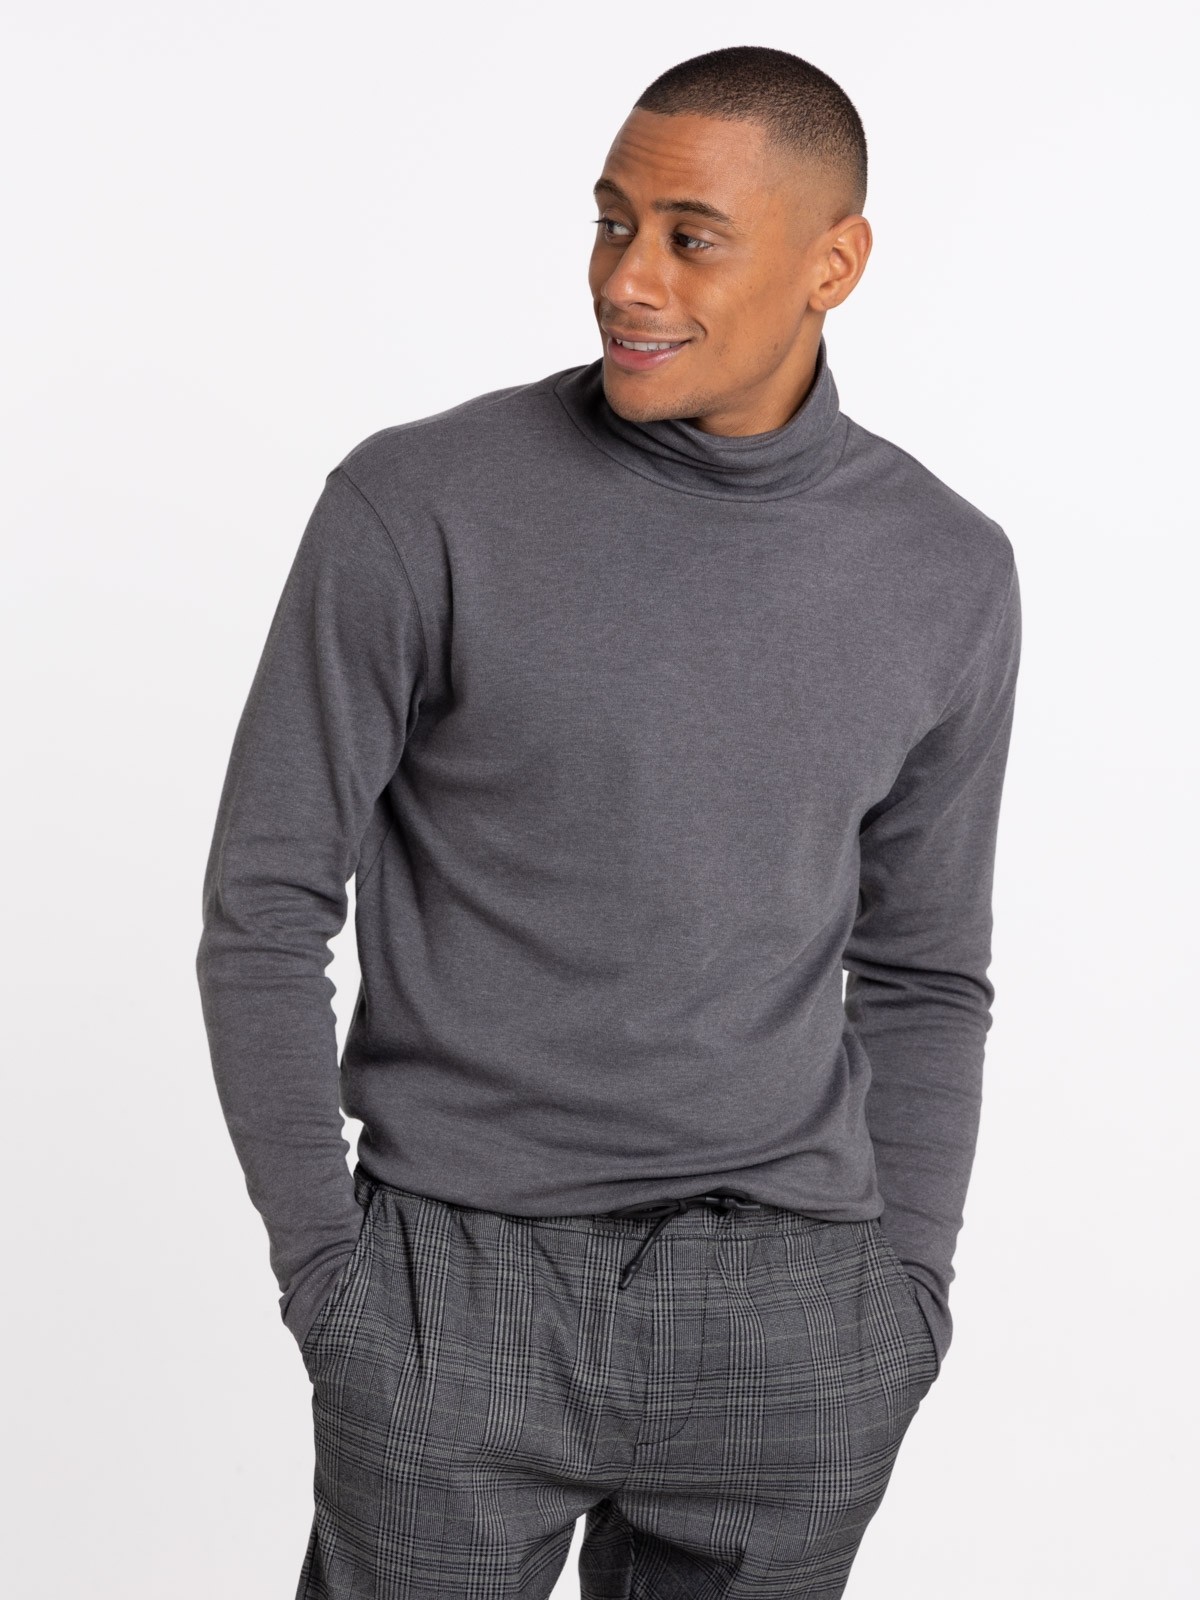 Sous-pull gris anthracite chiné homme - DistriCenter